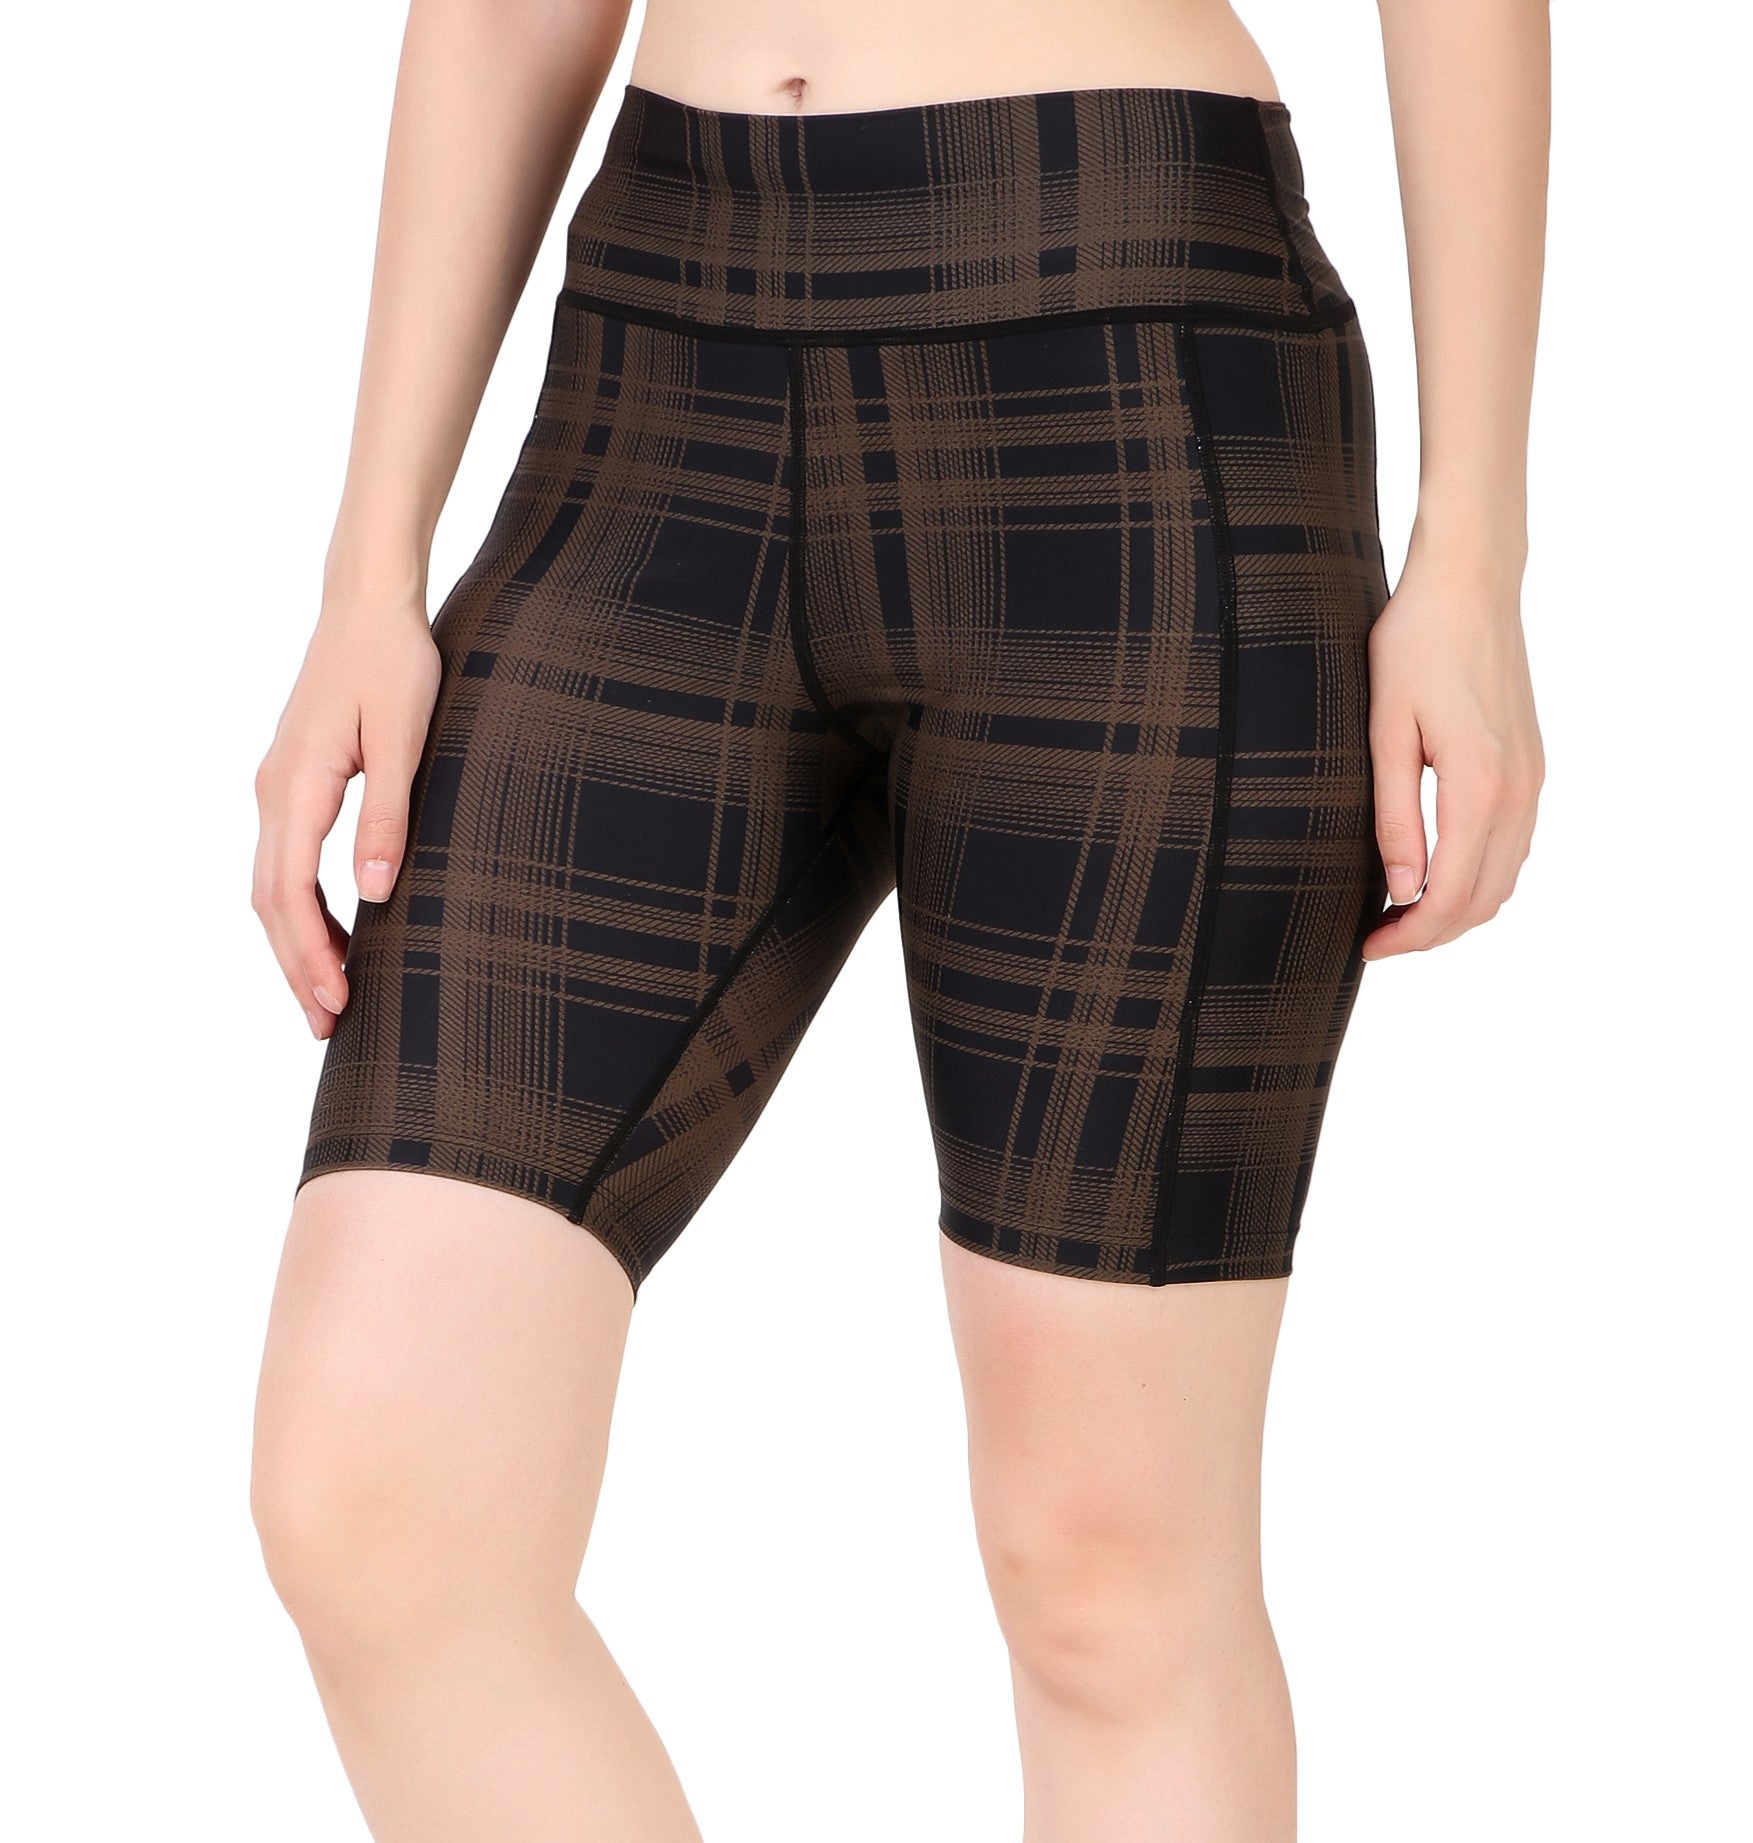 Nylon Compression Shorts For Women (Plade)